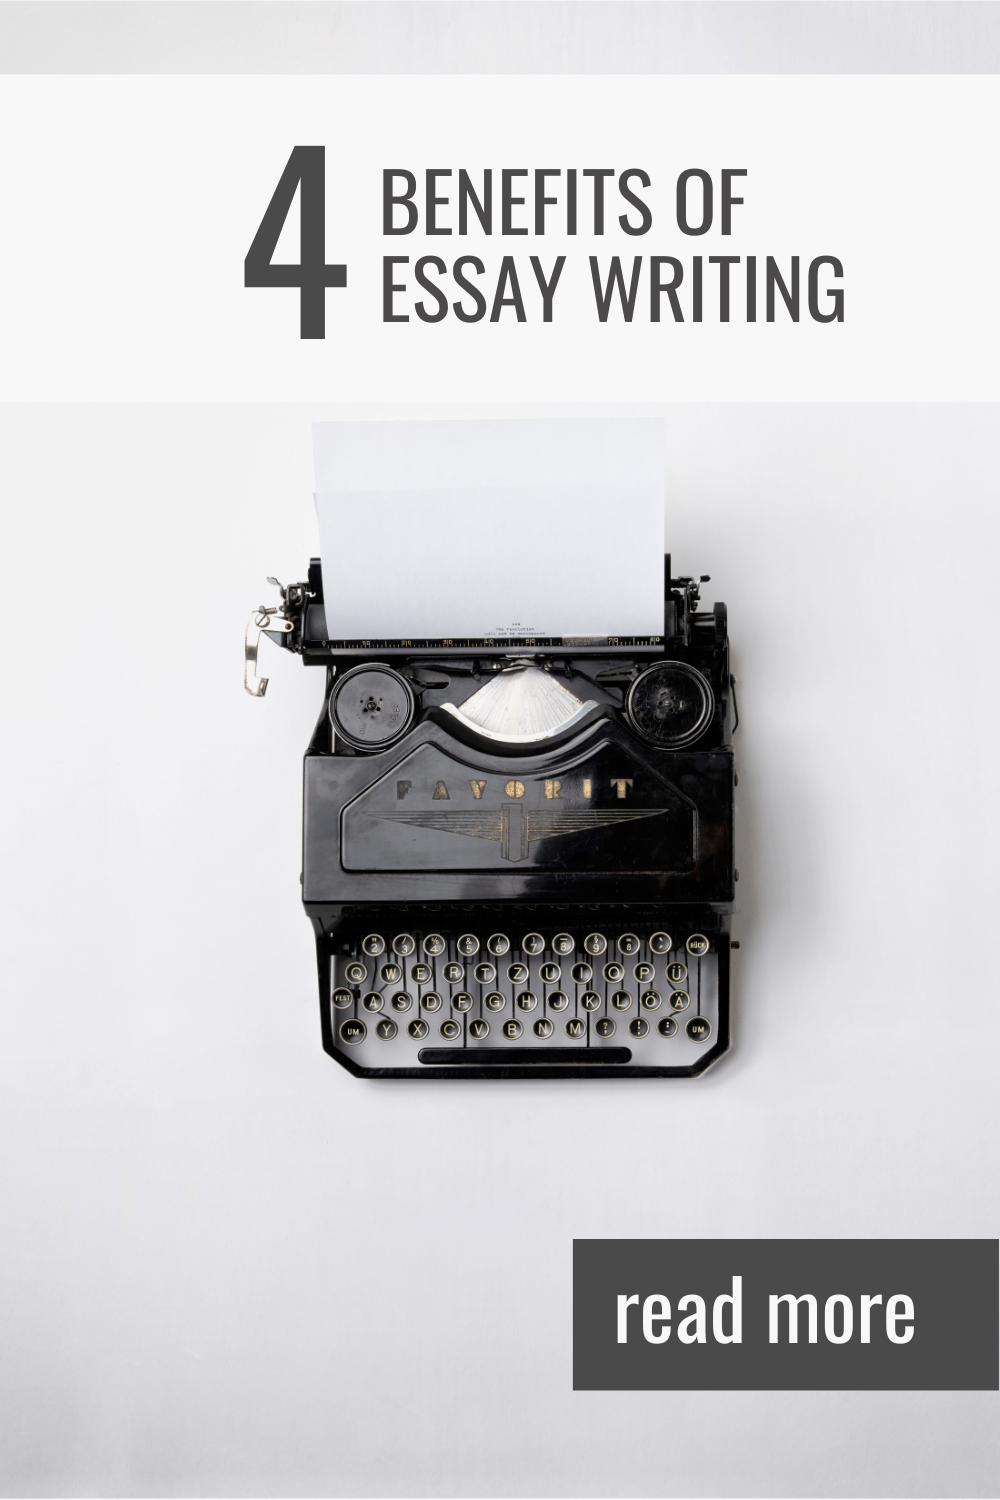 A vintage but working typewriter is pictured from a birds eye view and this article covers the benefit of essay writing.